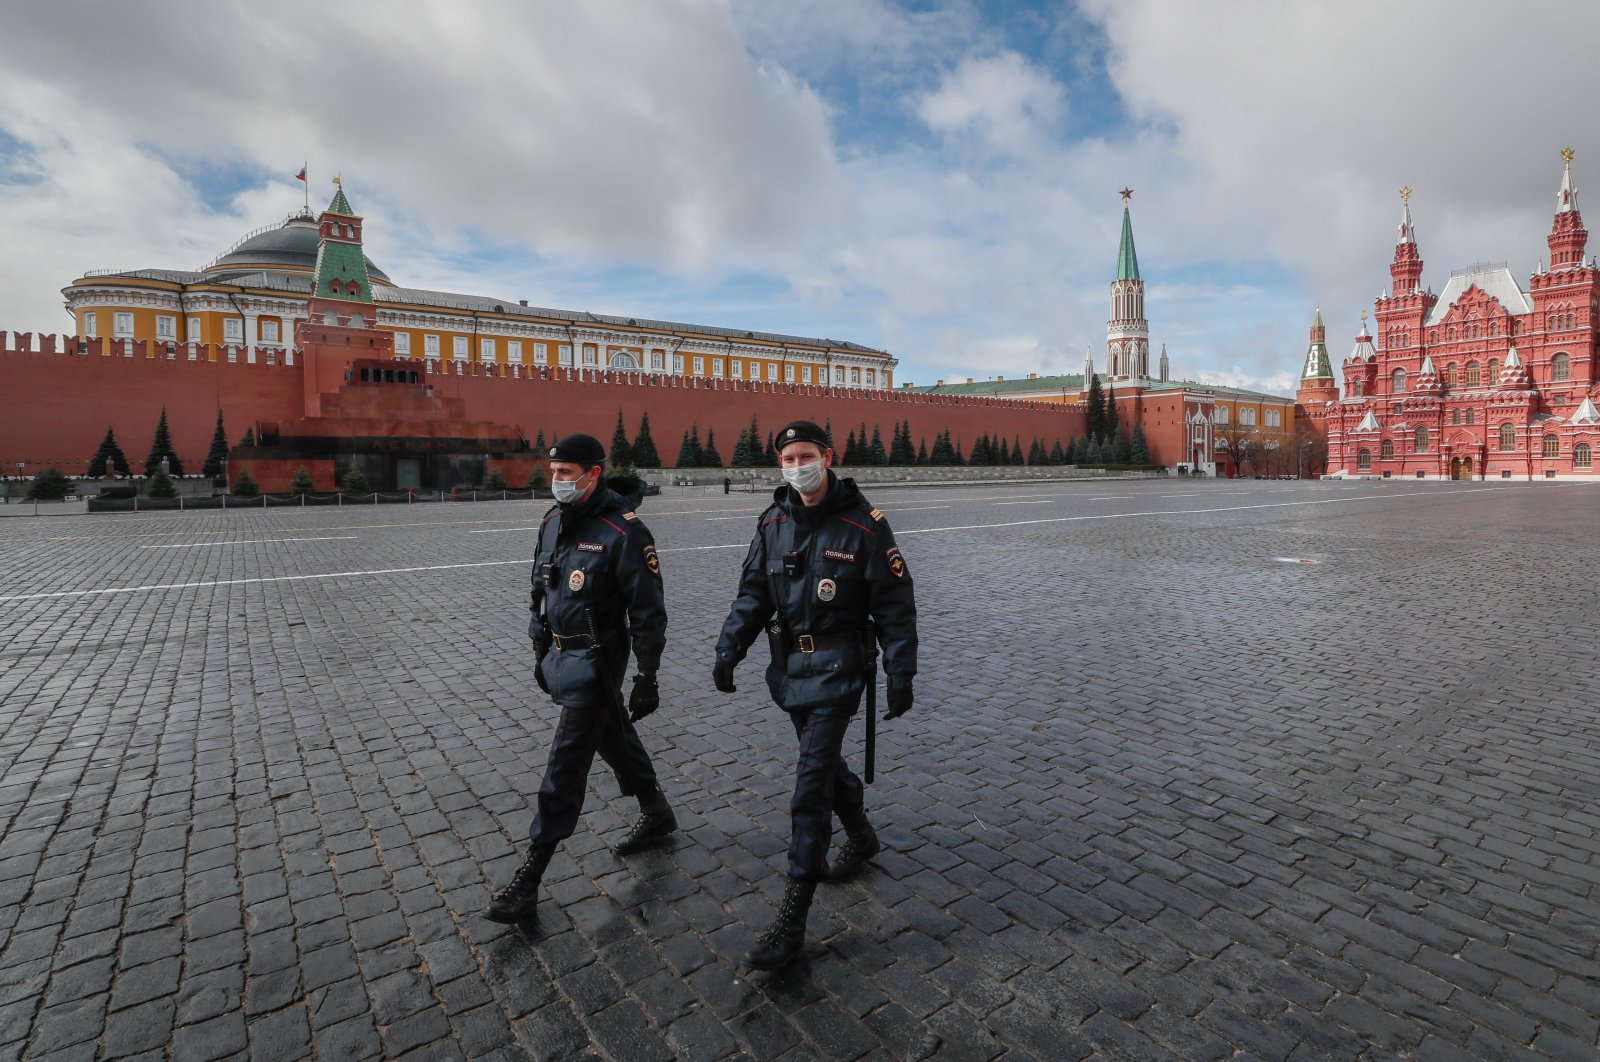 Police officers wearing protective masks walk on the Red Square in front of the Kremlin in Moscow, Russia, 17 April 2020. (EPA-EFE/YURI KOCHETKOV Photo)